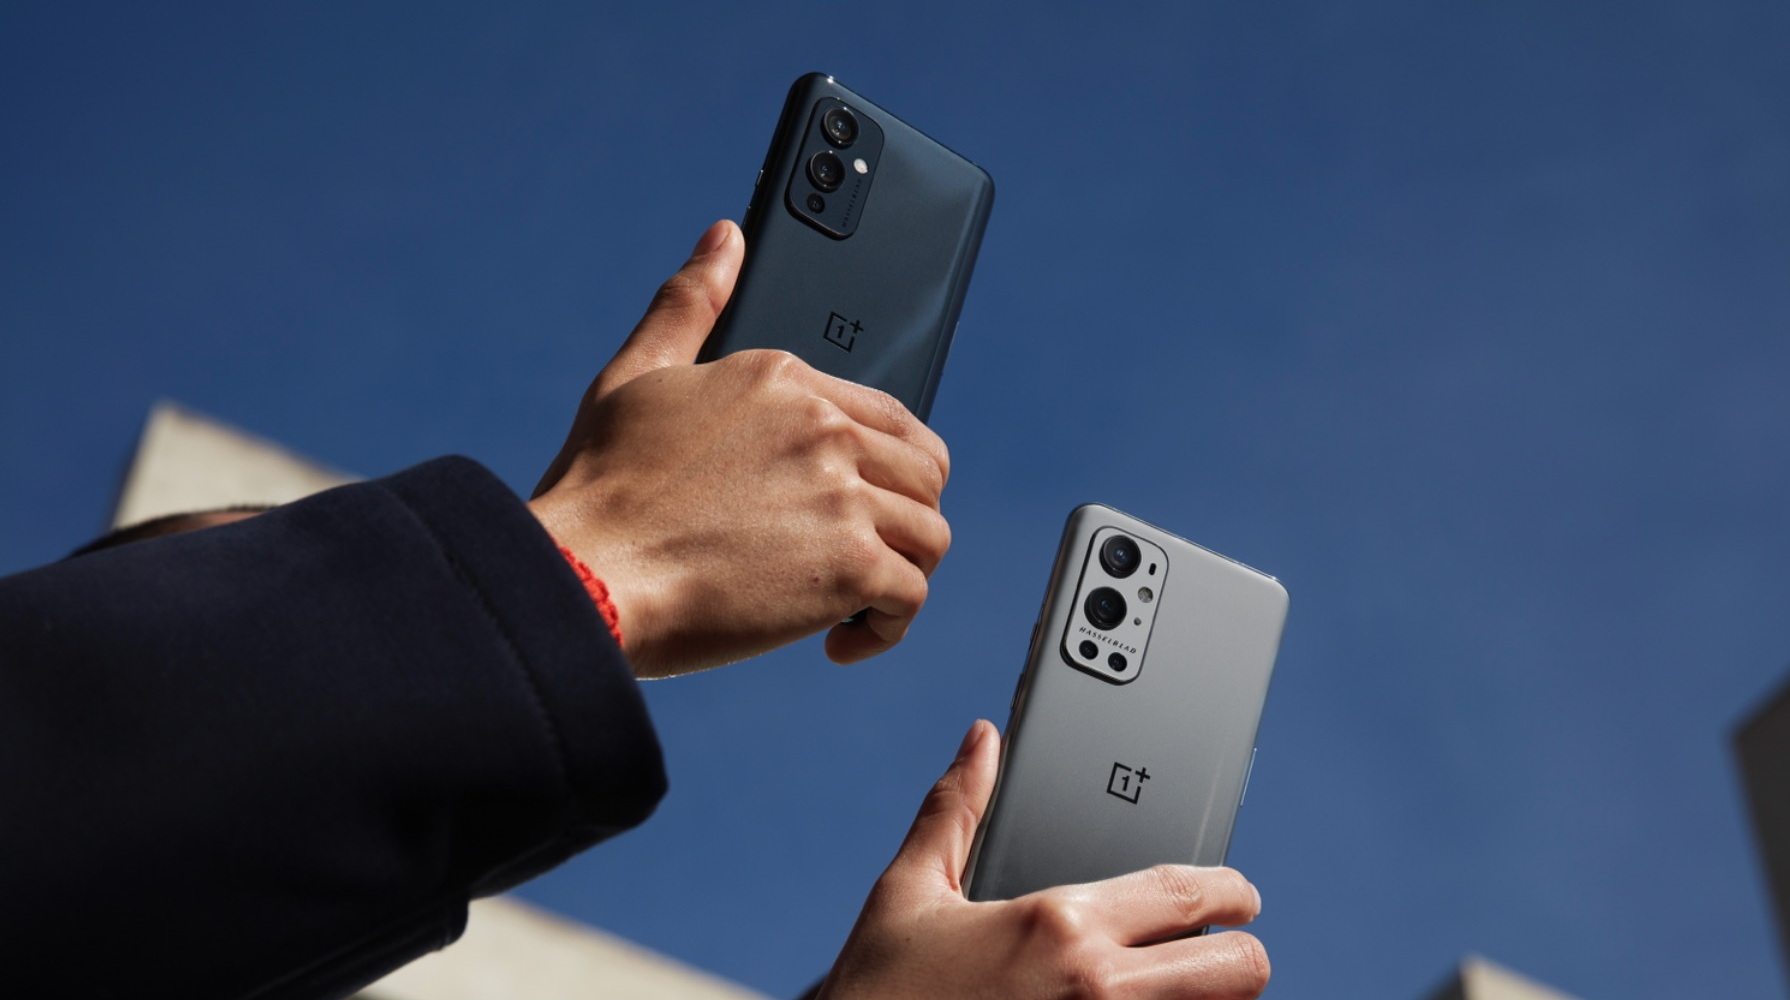 OnePlus flagships started receiving OxygenOS 12 firmware on Android 12 again